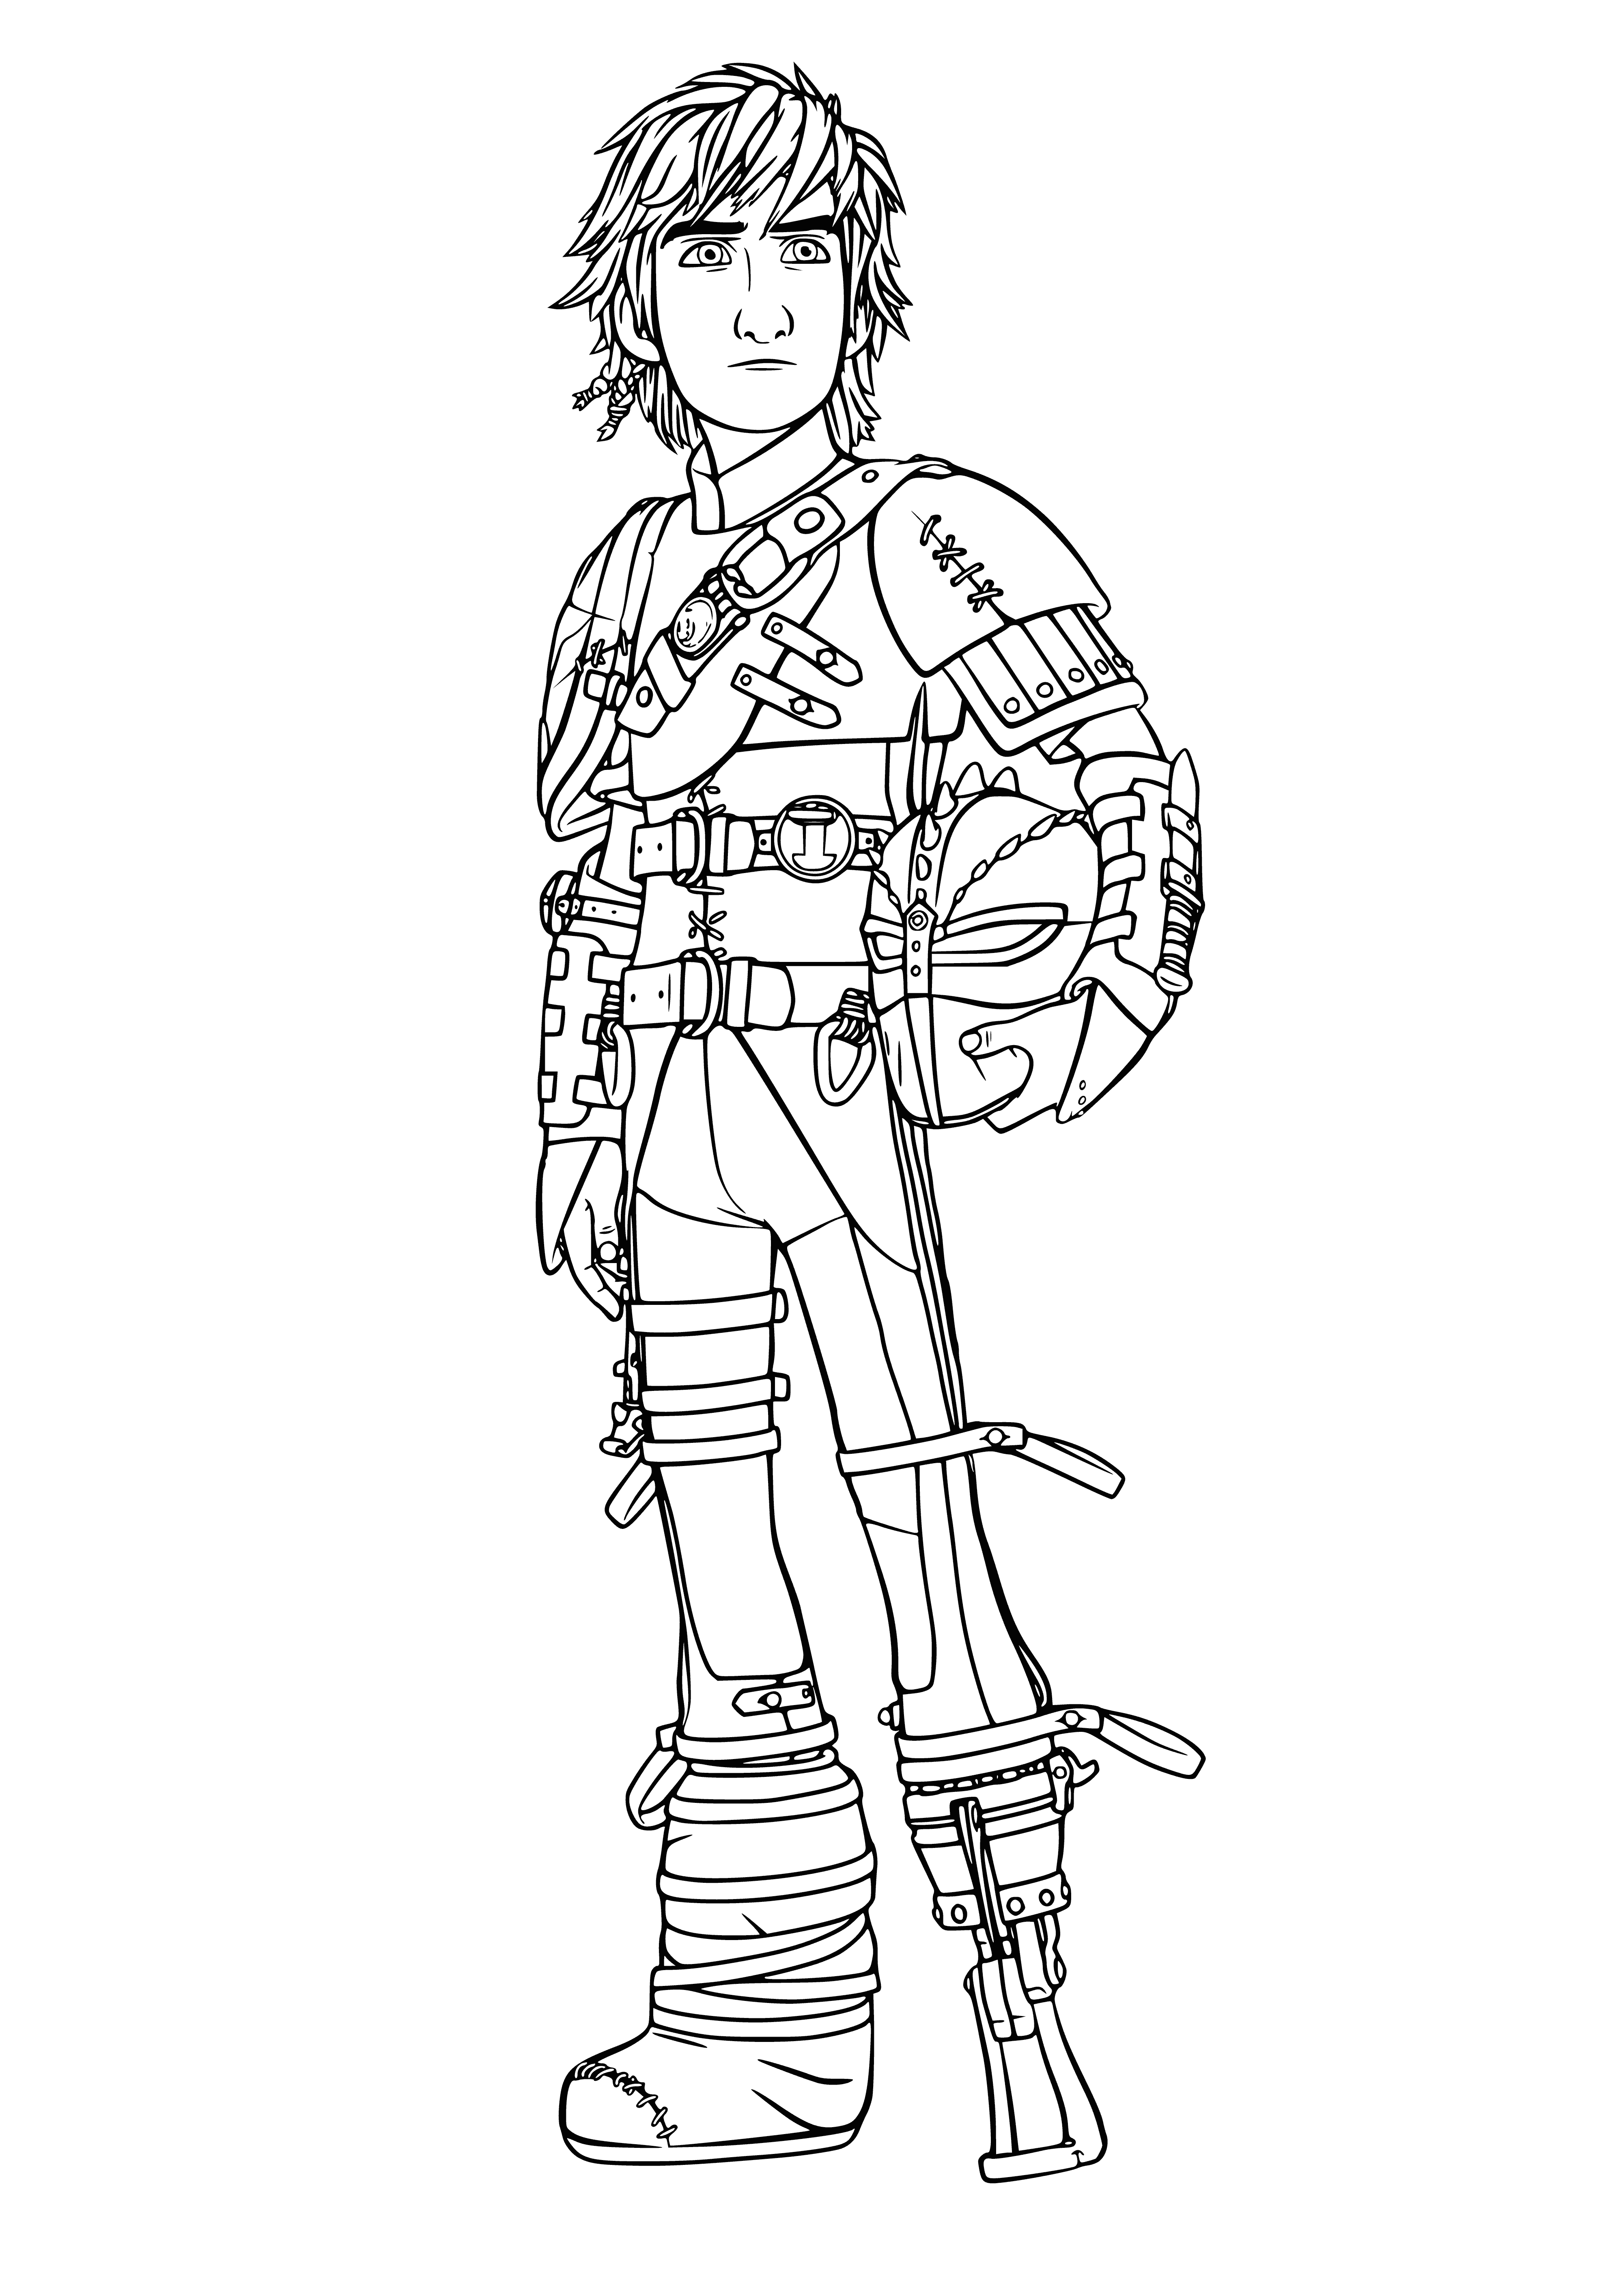 coloring page: Hiccup is a brave boy with a wooden leg and missing right hand; holding a small, brown dragon with its wings spread, he fully embraces his differences.